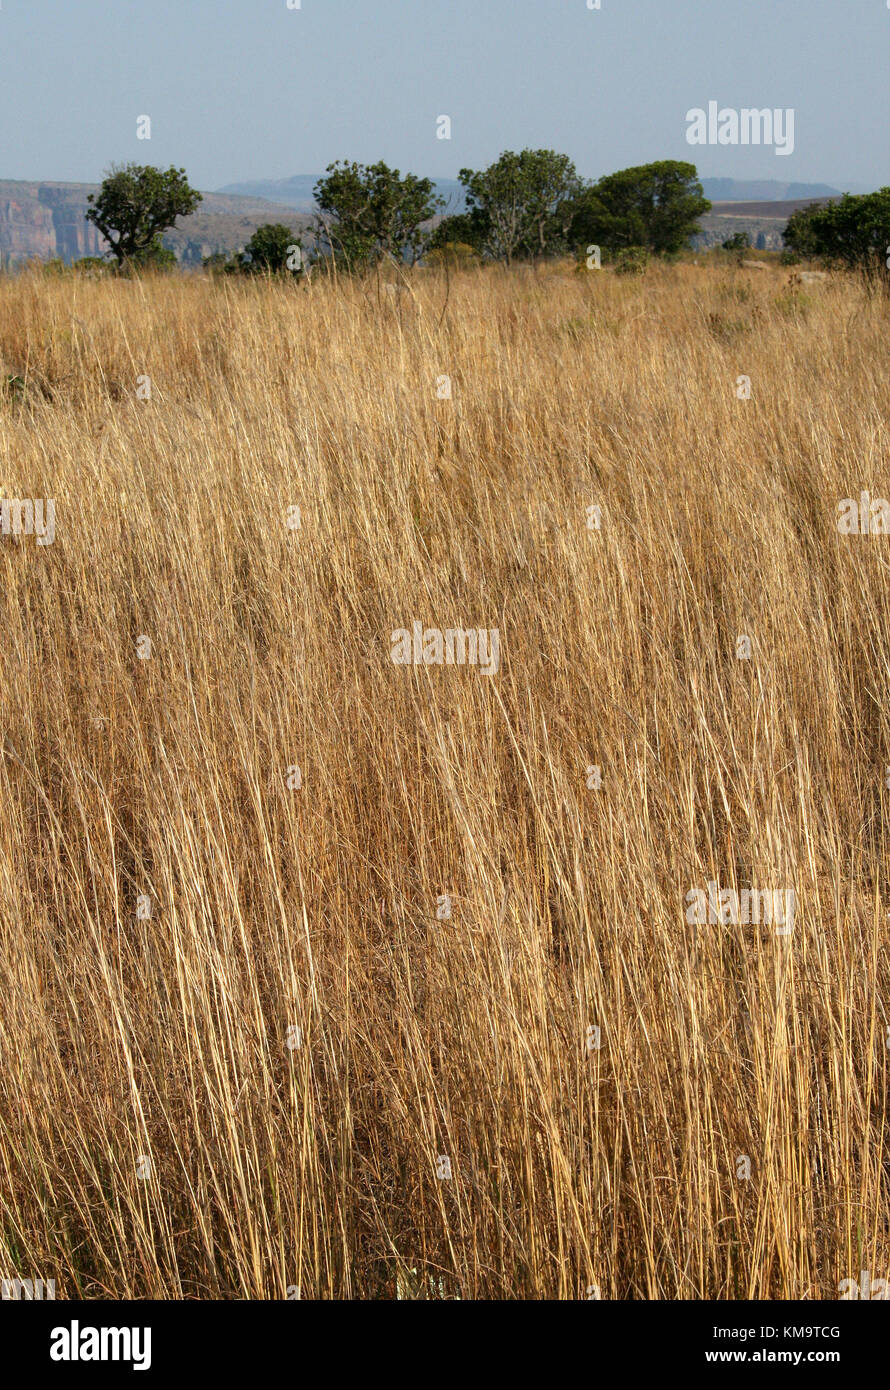 Mpumalanga, South Africa, close-up of dry long grass with green trees in background Stock Photo